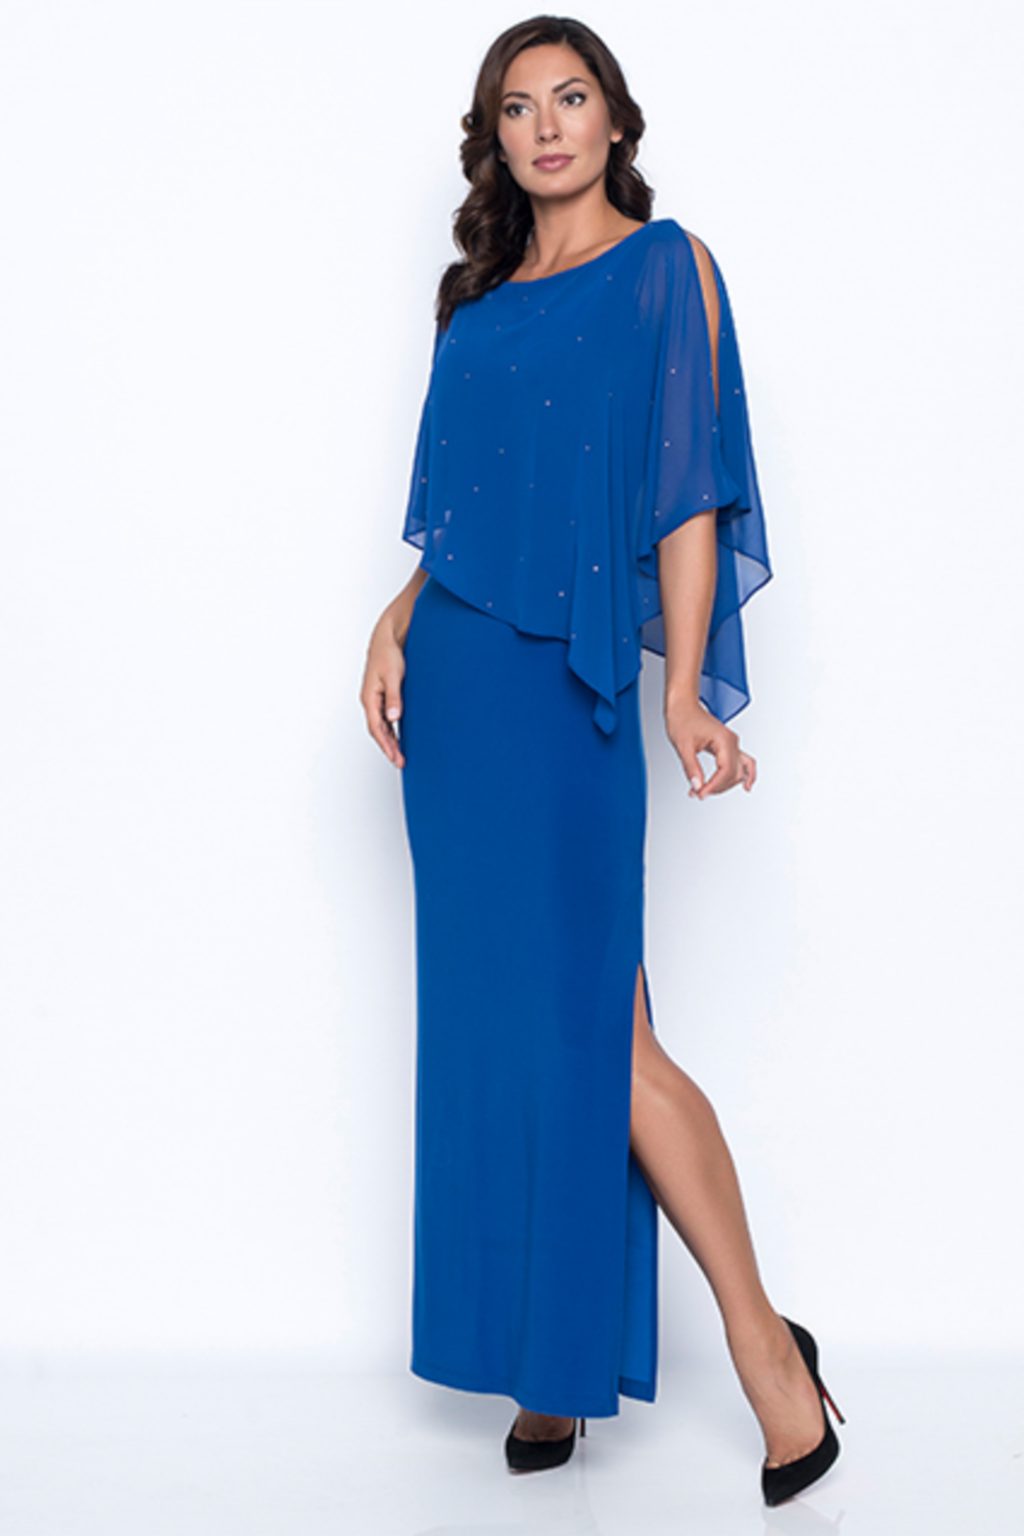 Full Length Dress with Chiffon Overlay. 68004 - Catherines of Partick